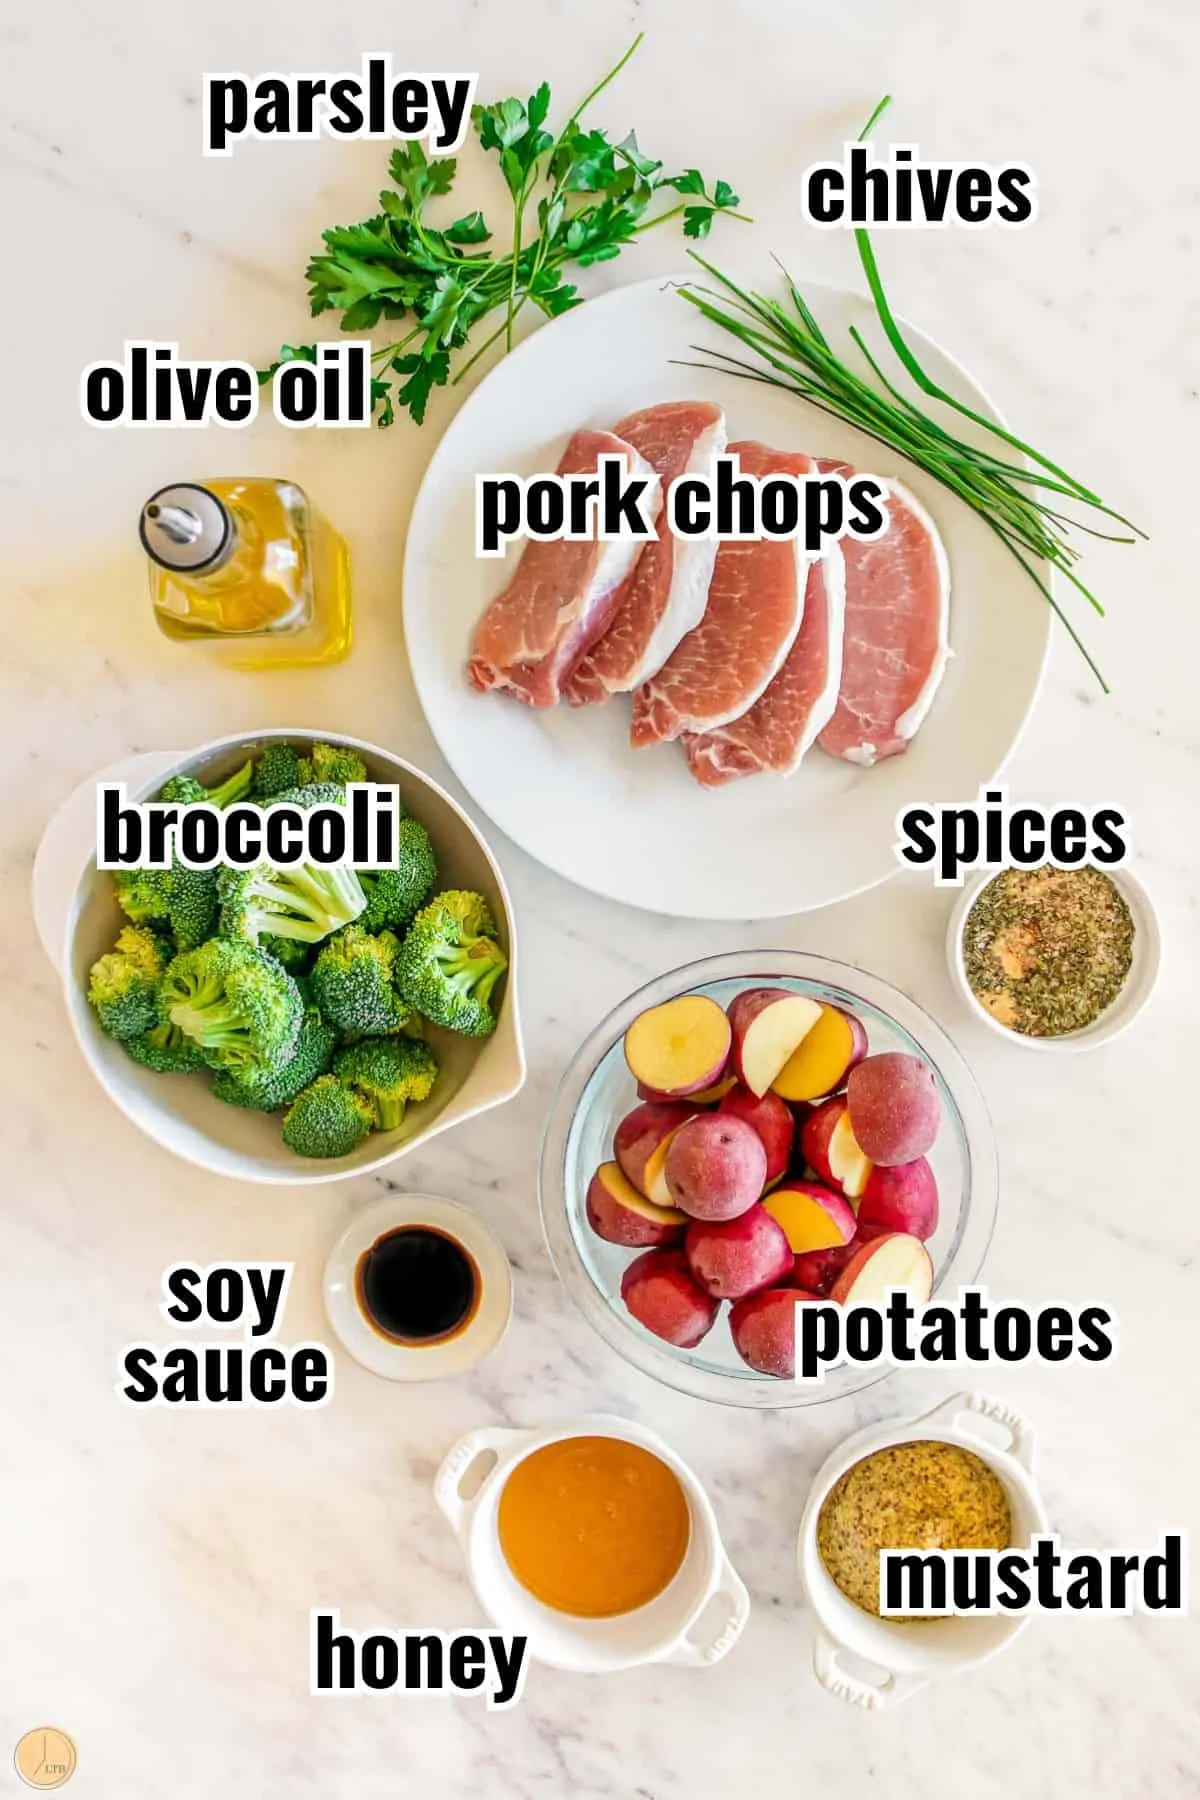 ingredients for a meal that include tender pork chops, whole grain mustard, and herbs.